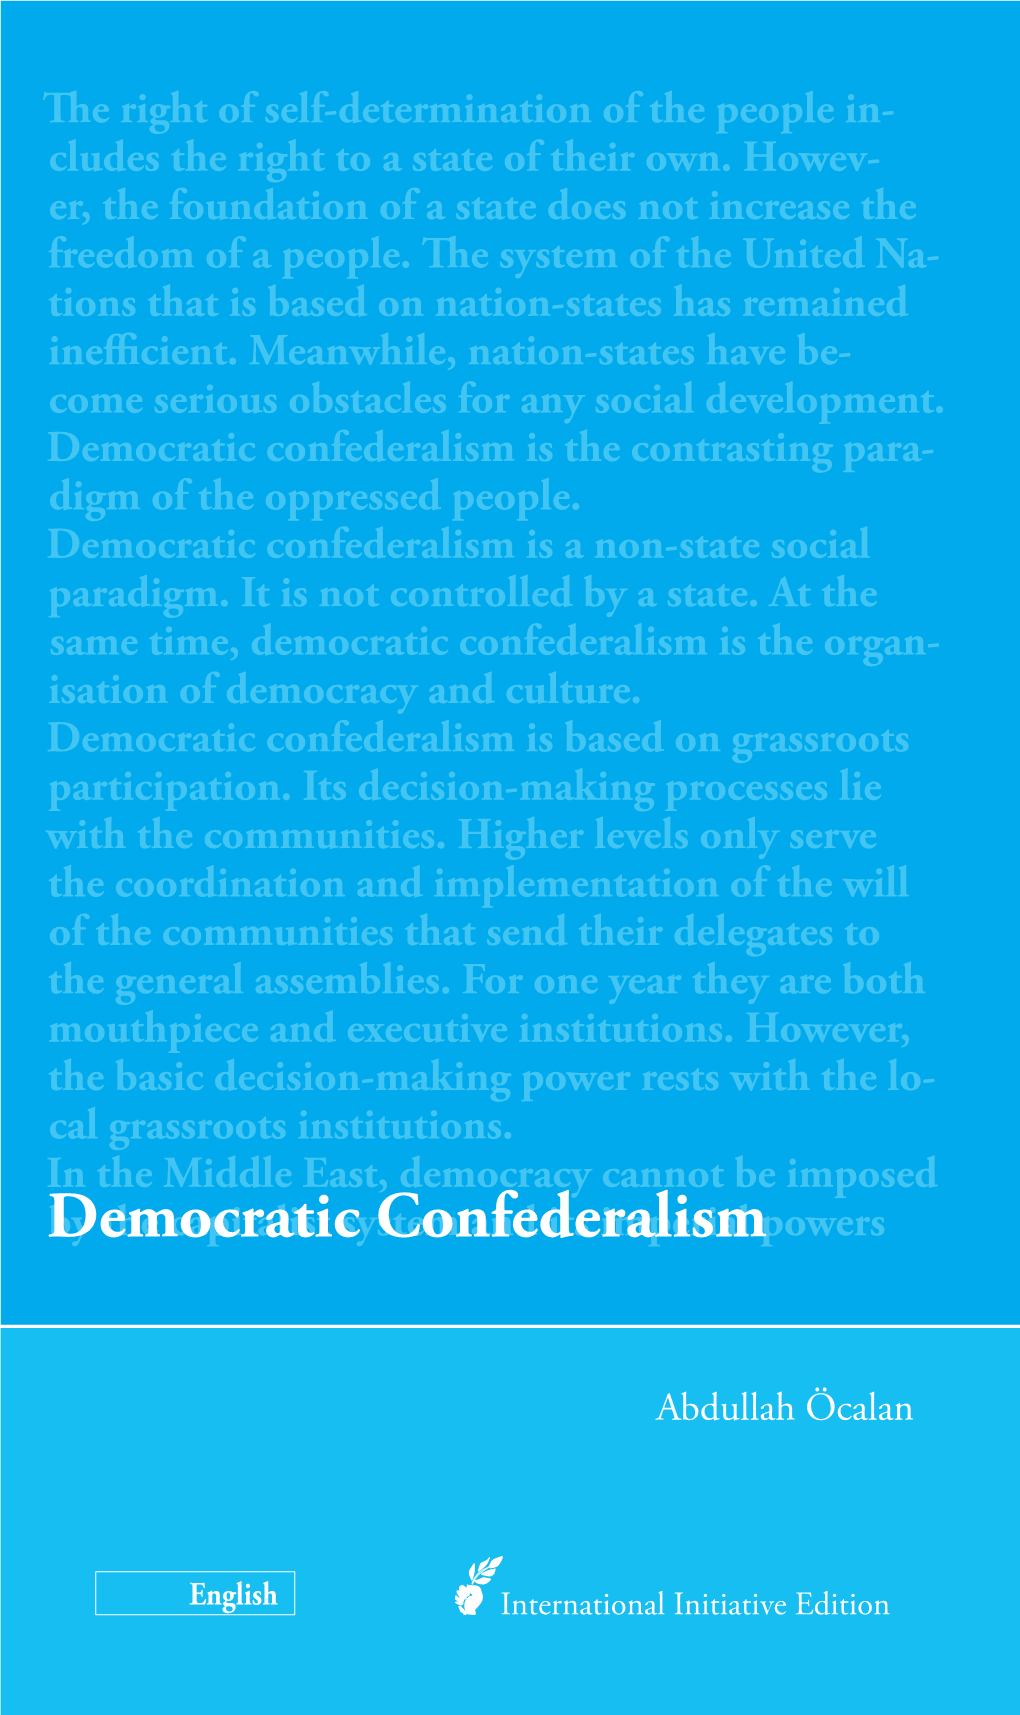 Democratic Confederalism Is the Contrasting Para- Digm of the Oppressed People